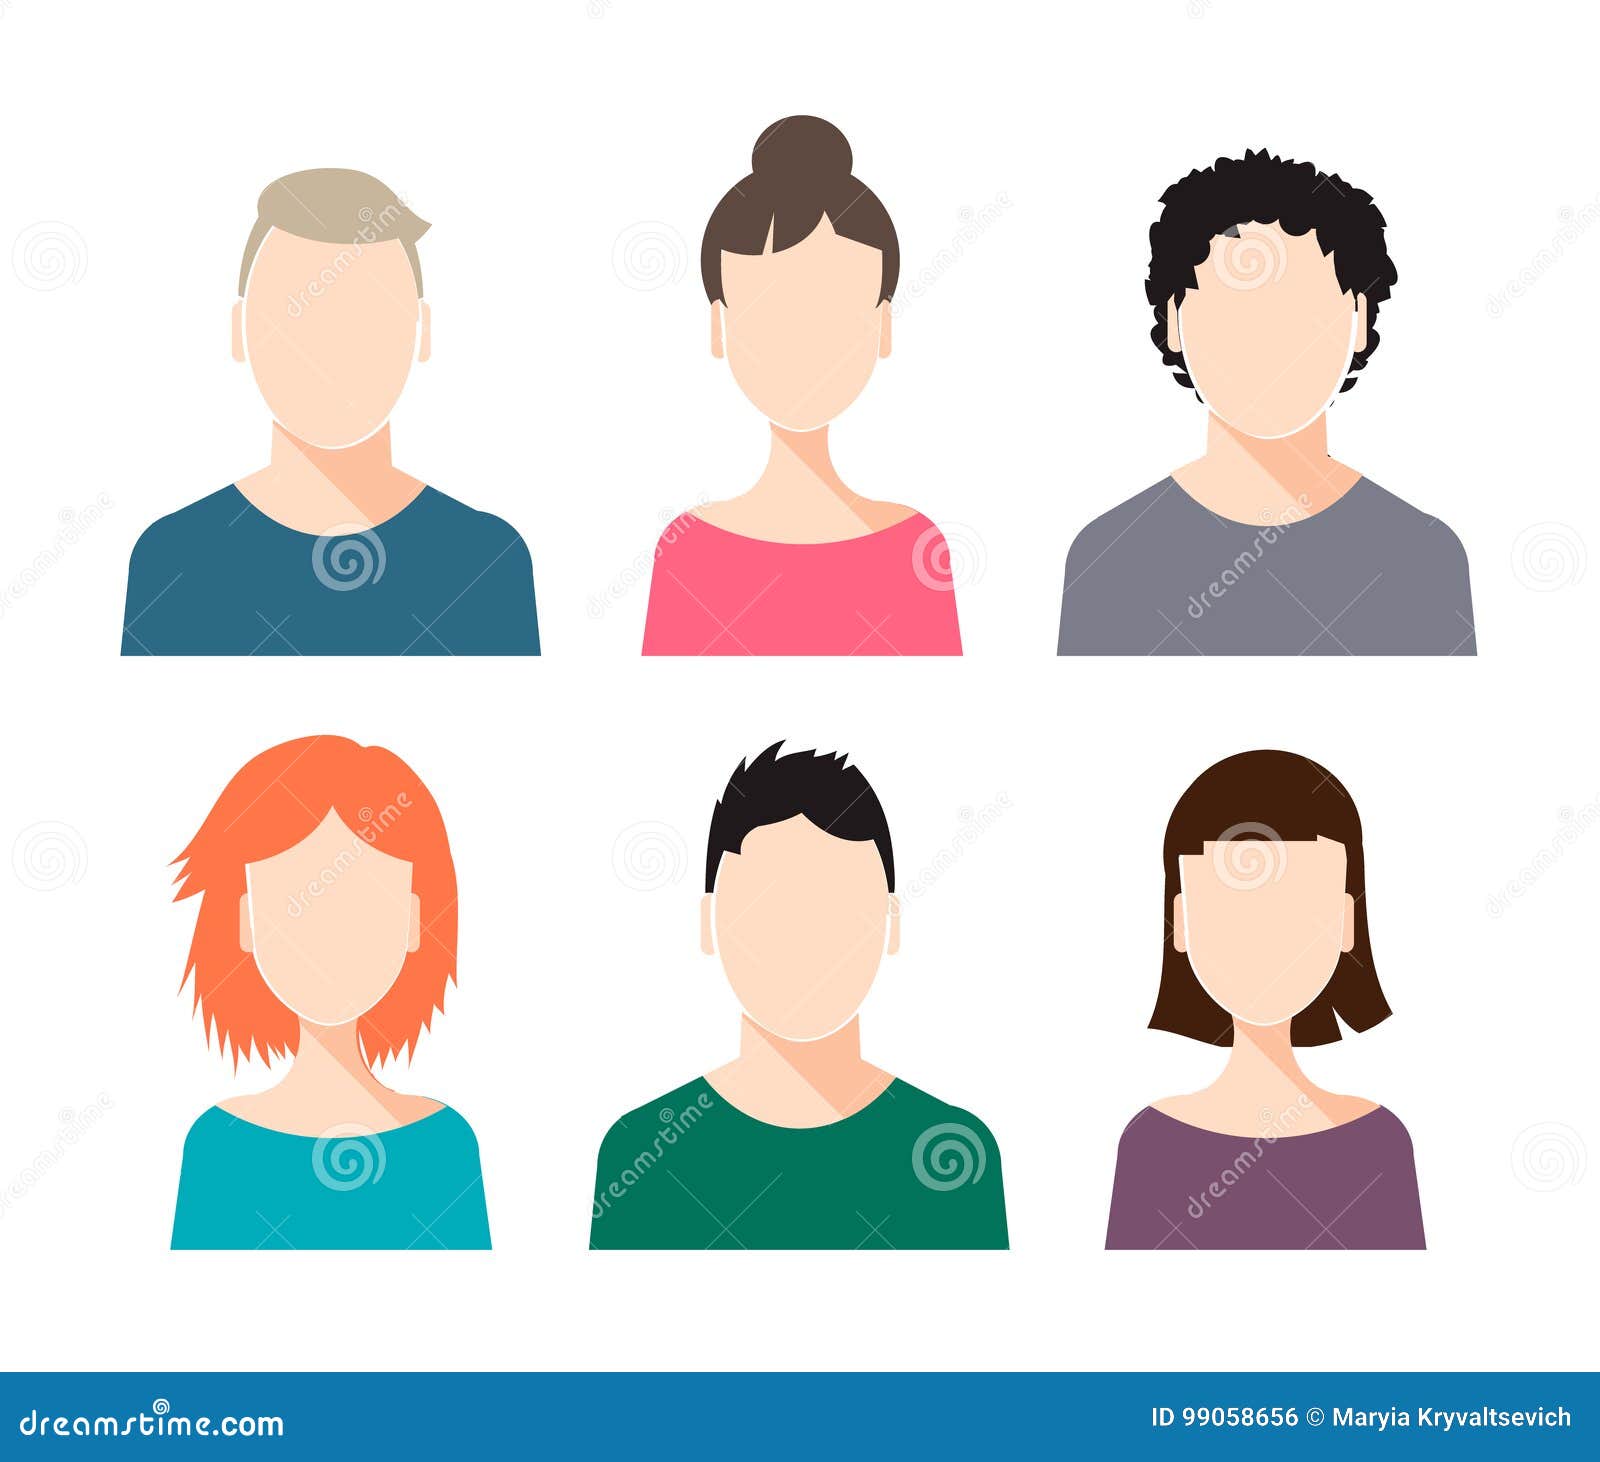 Vector Set of Human Faces - Male and Female, , with Different Hairstyles.  Stock Vector - Illustration of people, portrait: 99058656